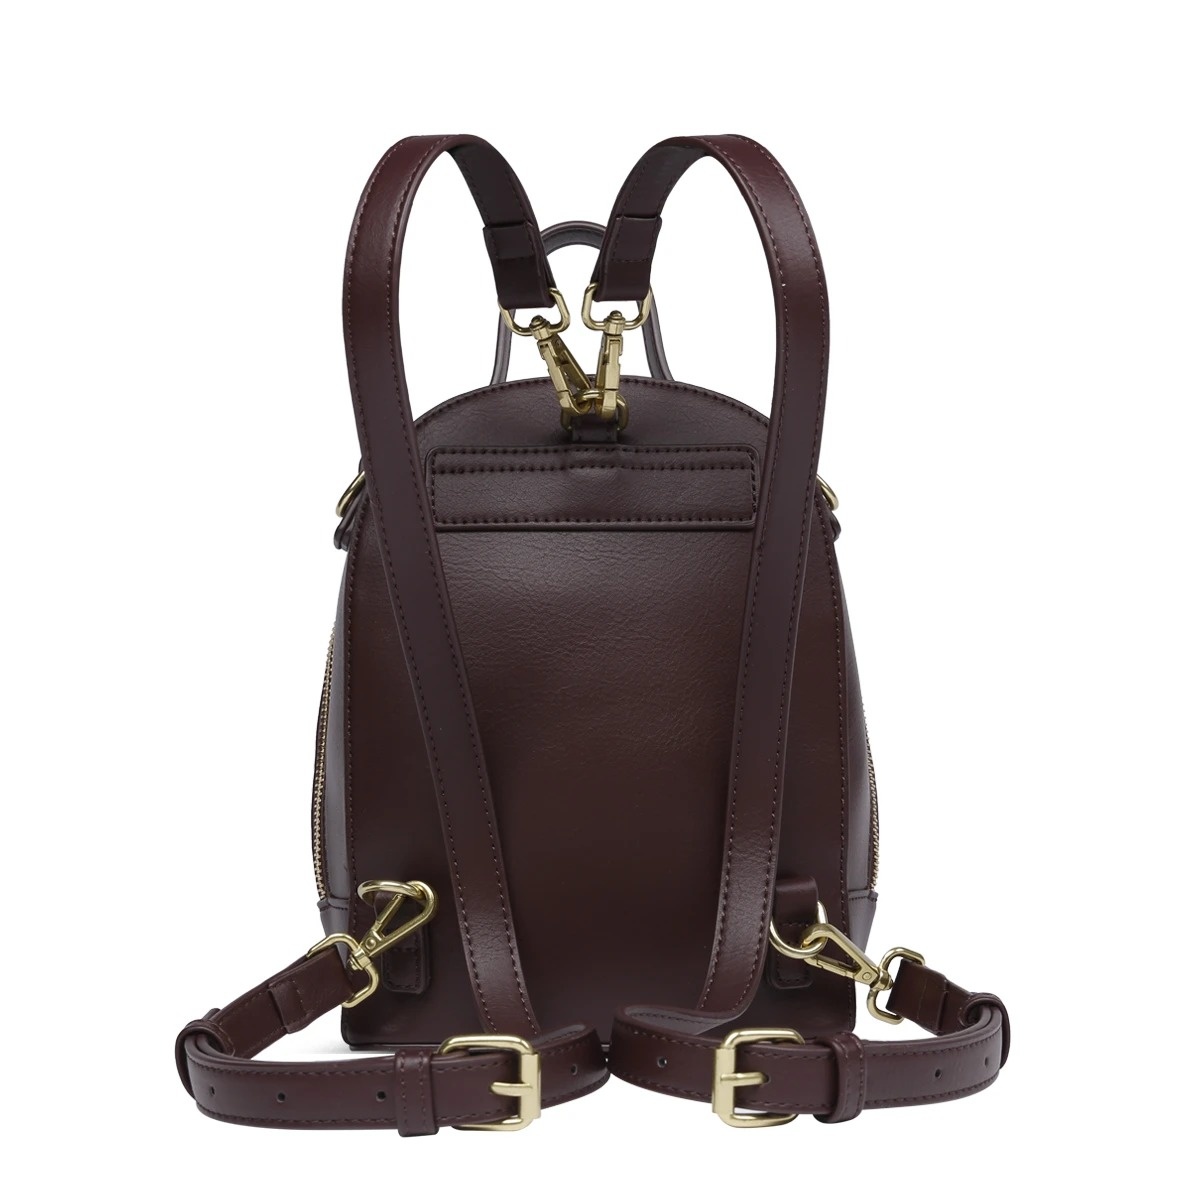 Matein Convertible Leather Women's Backpack Purses